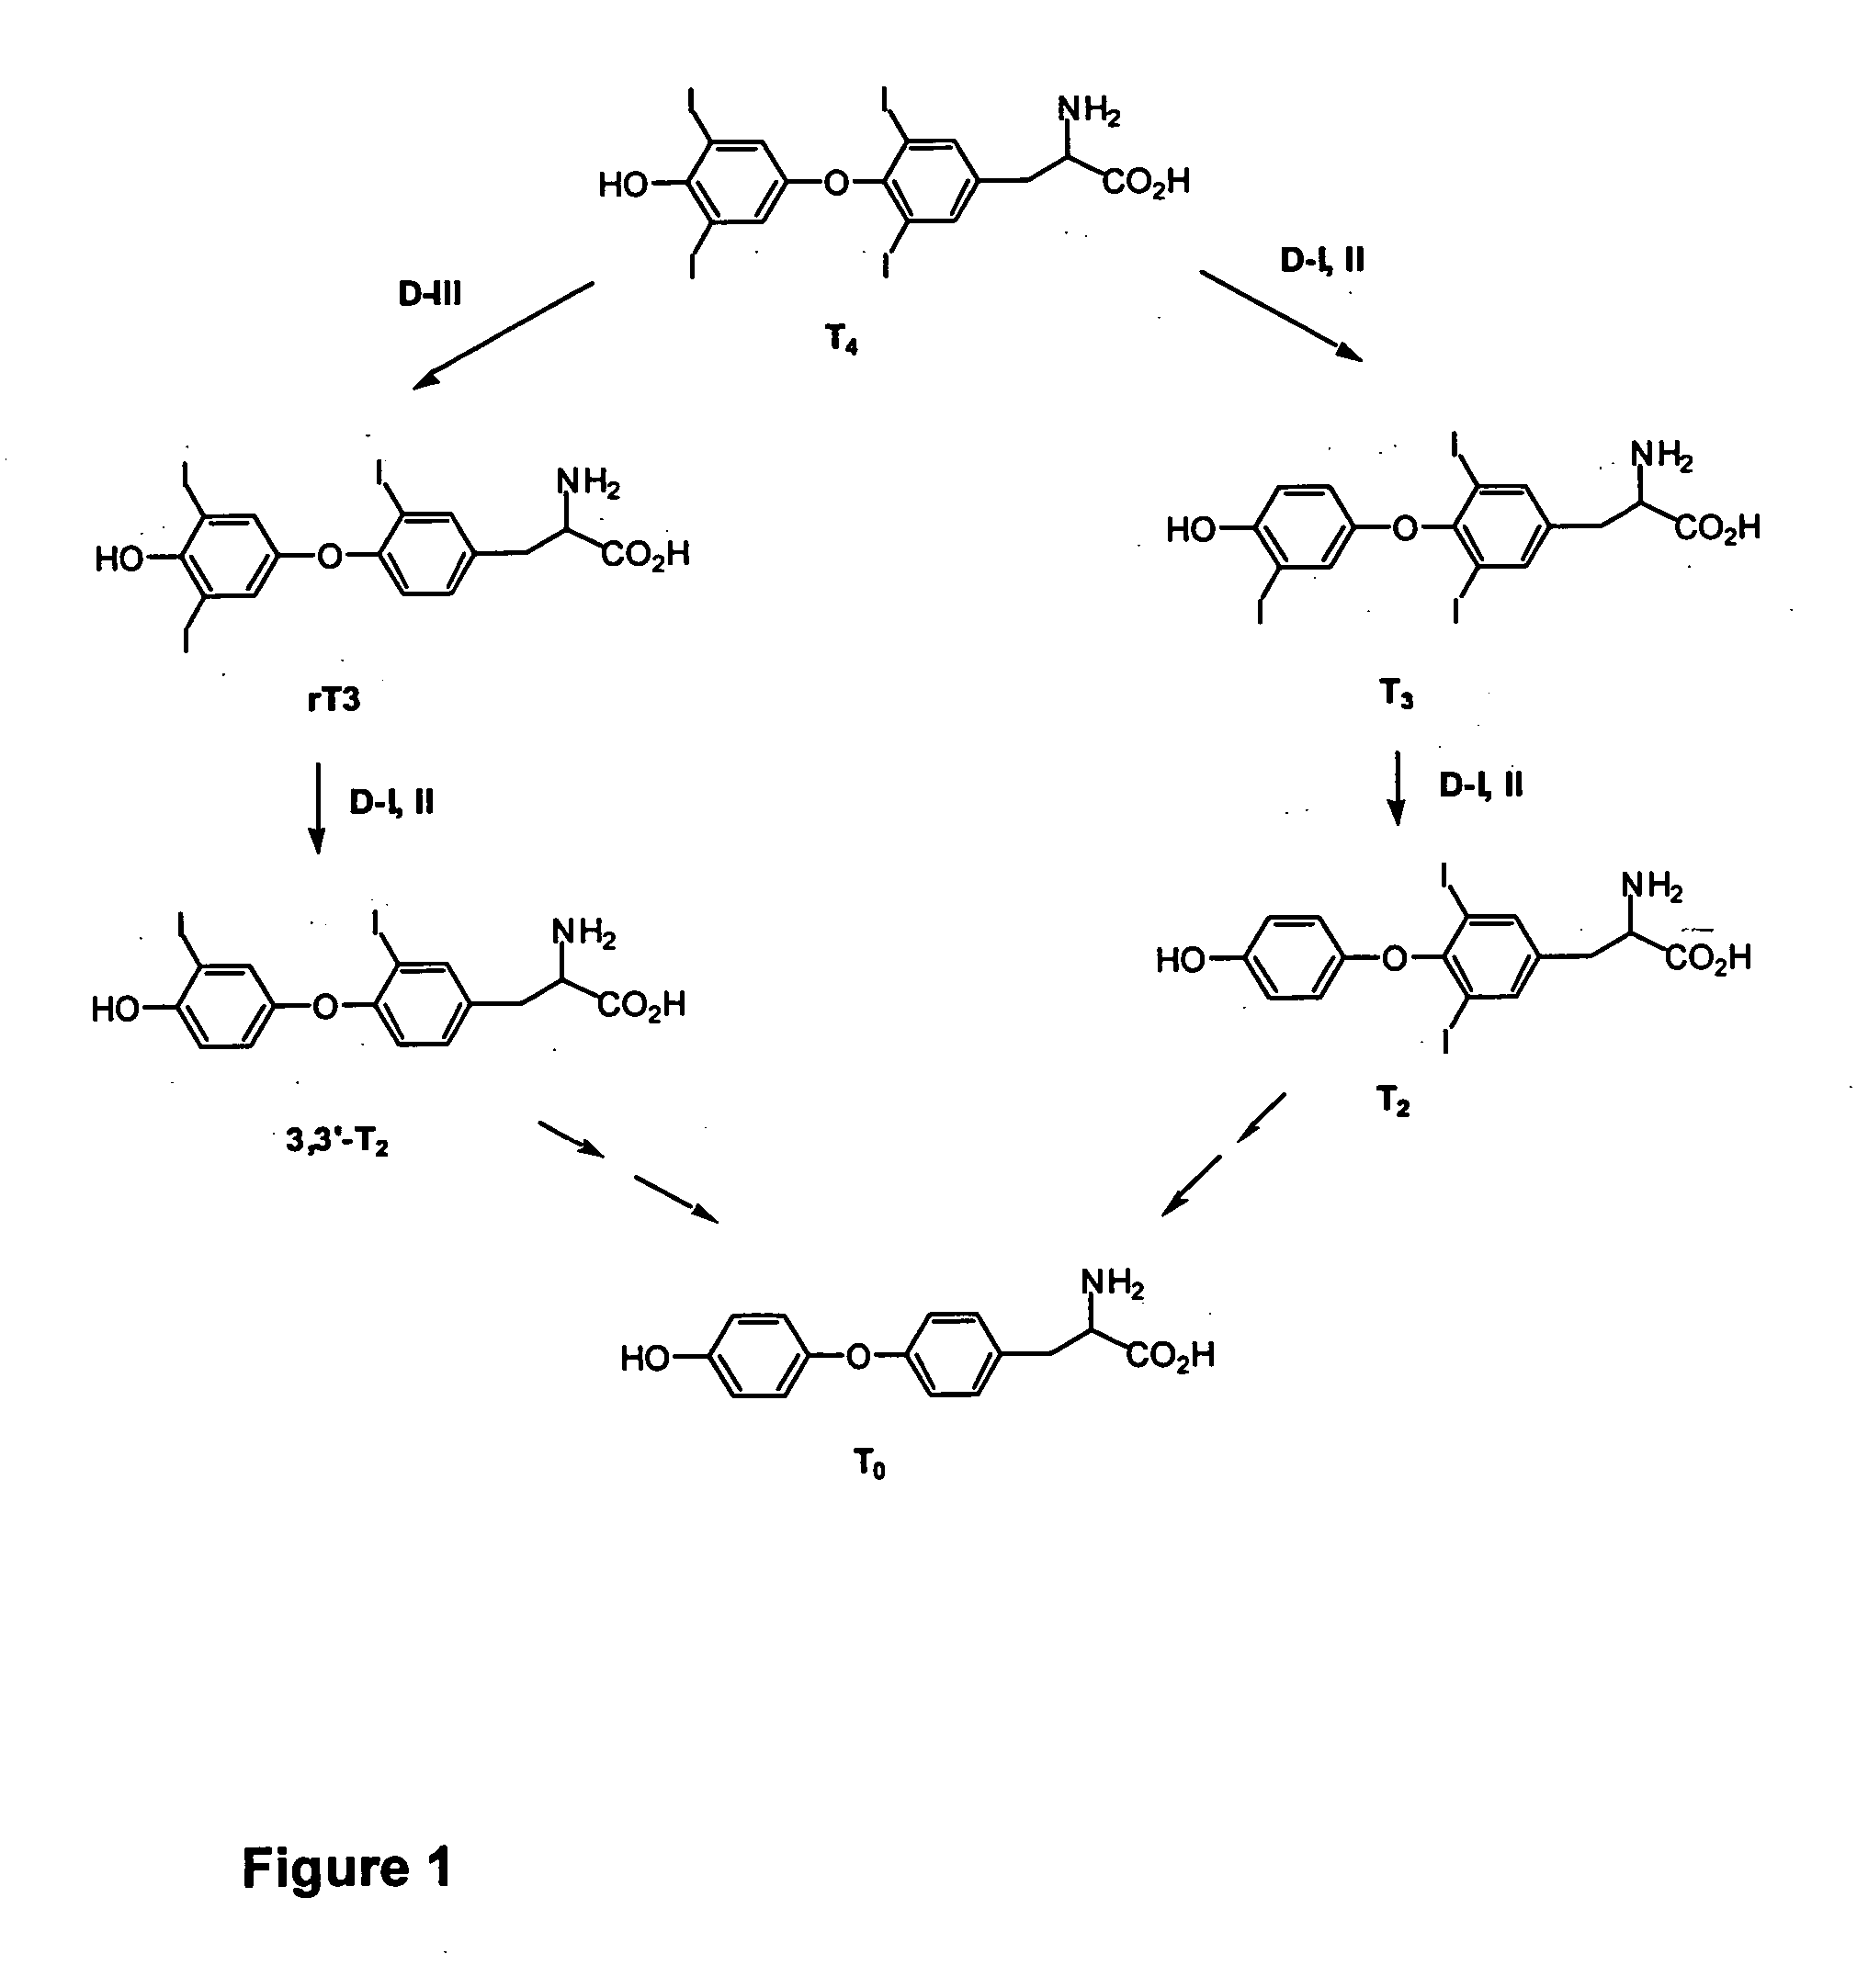 Thyronamine derivatives and analogs and methods of use thereof